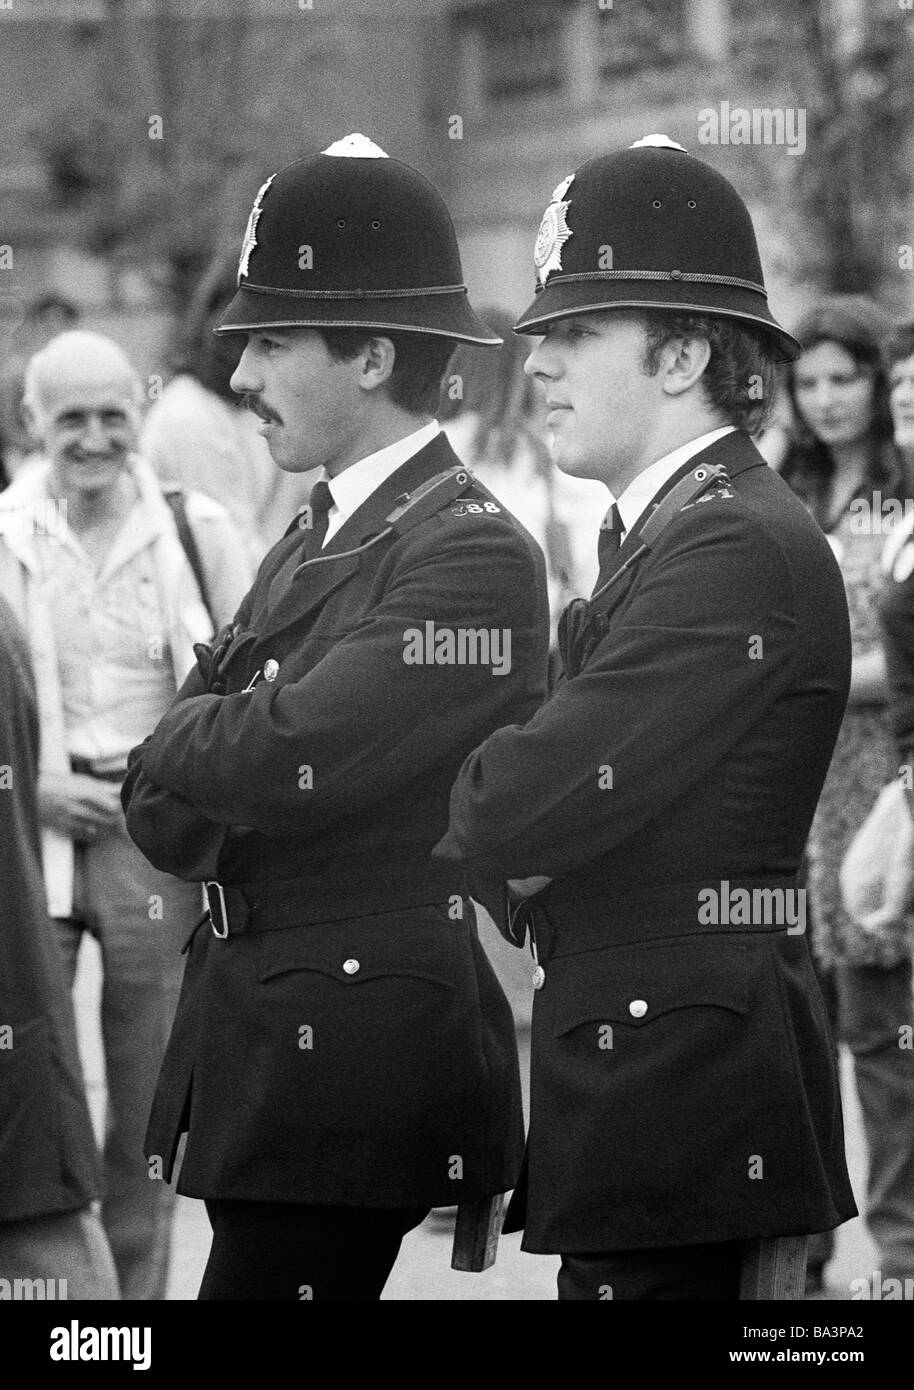 Seventies, black and white photo, police, two British policemen, Bobbies, aged 25 to 35 years, Great Britain, England, London Stock Photo